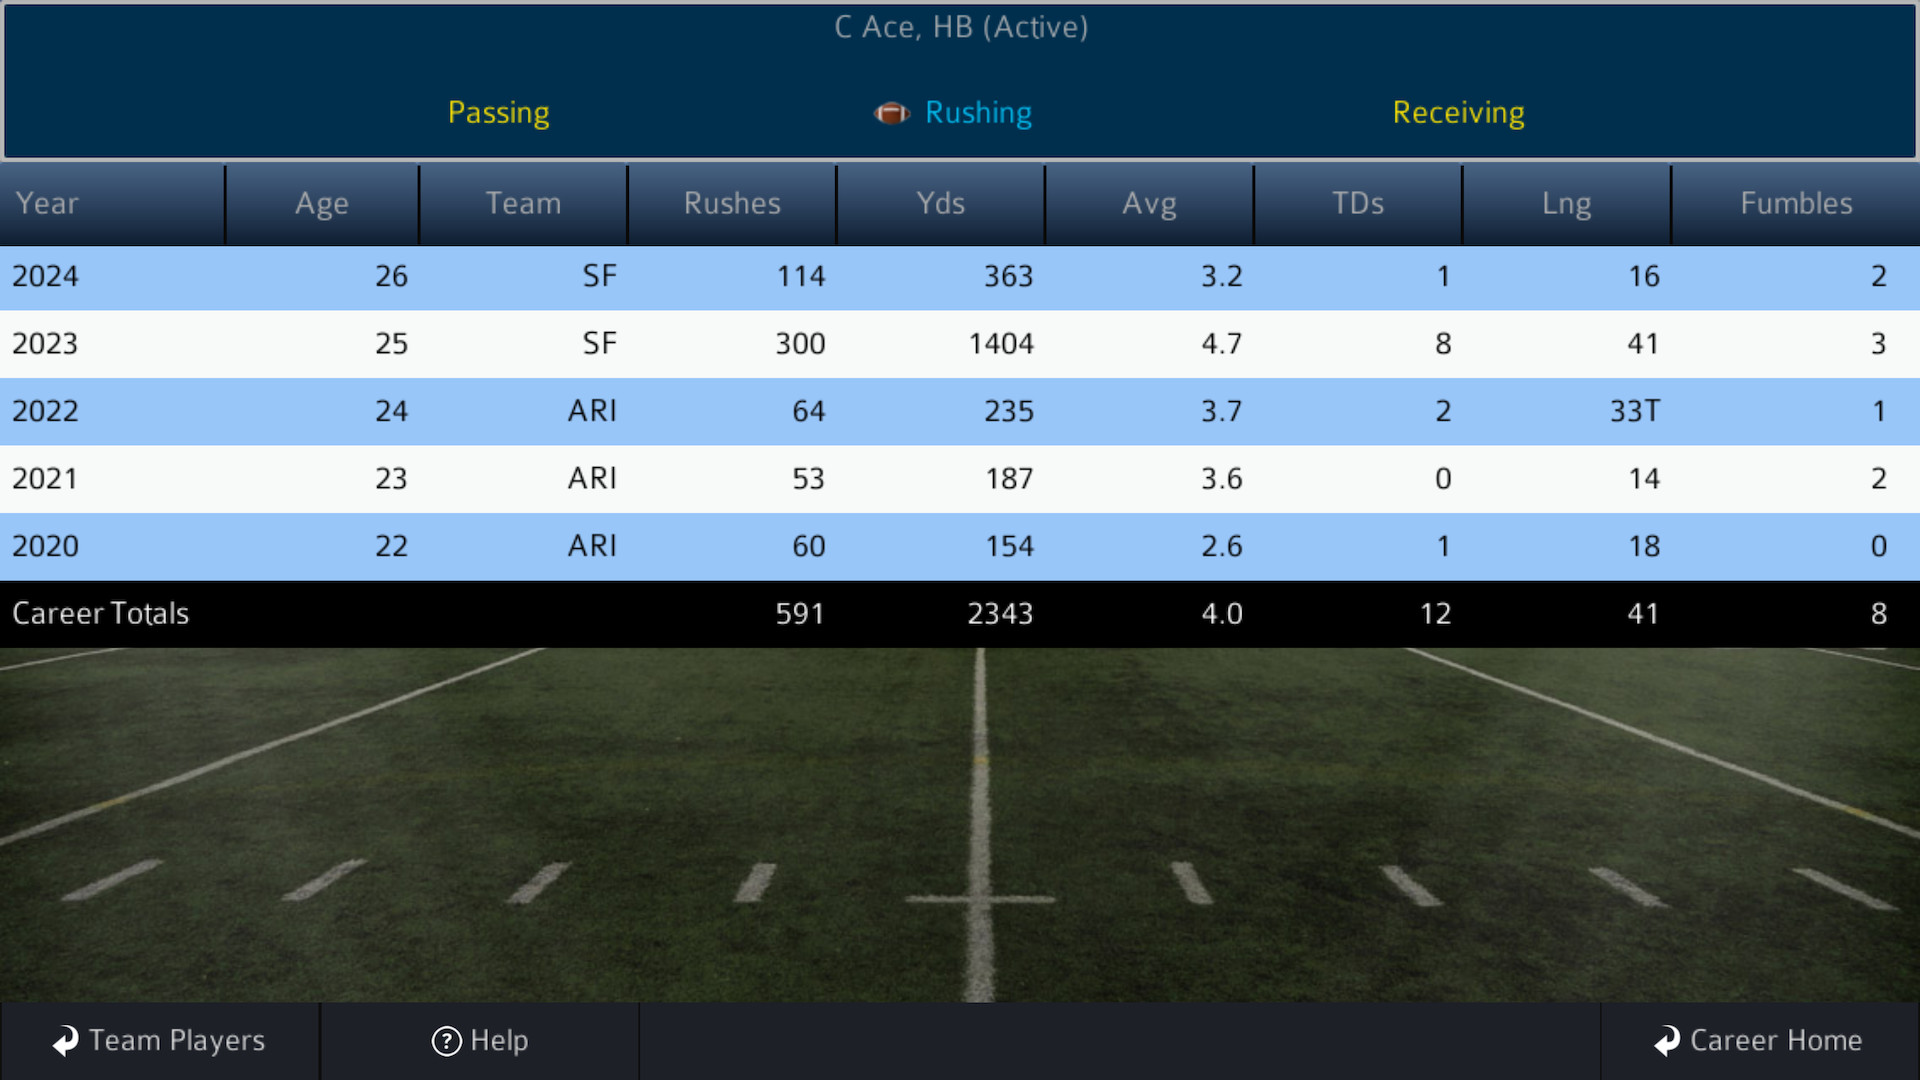 Pro Strategy Football 2021 Free Download